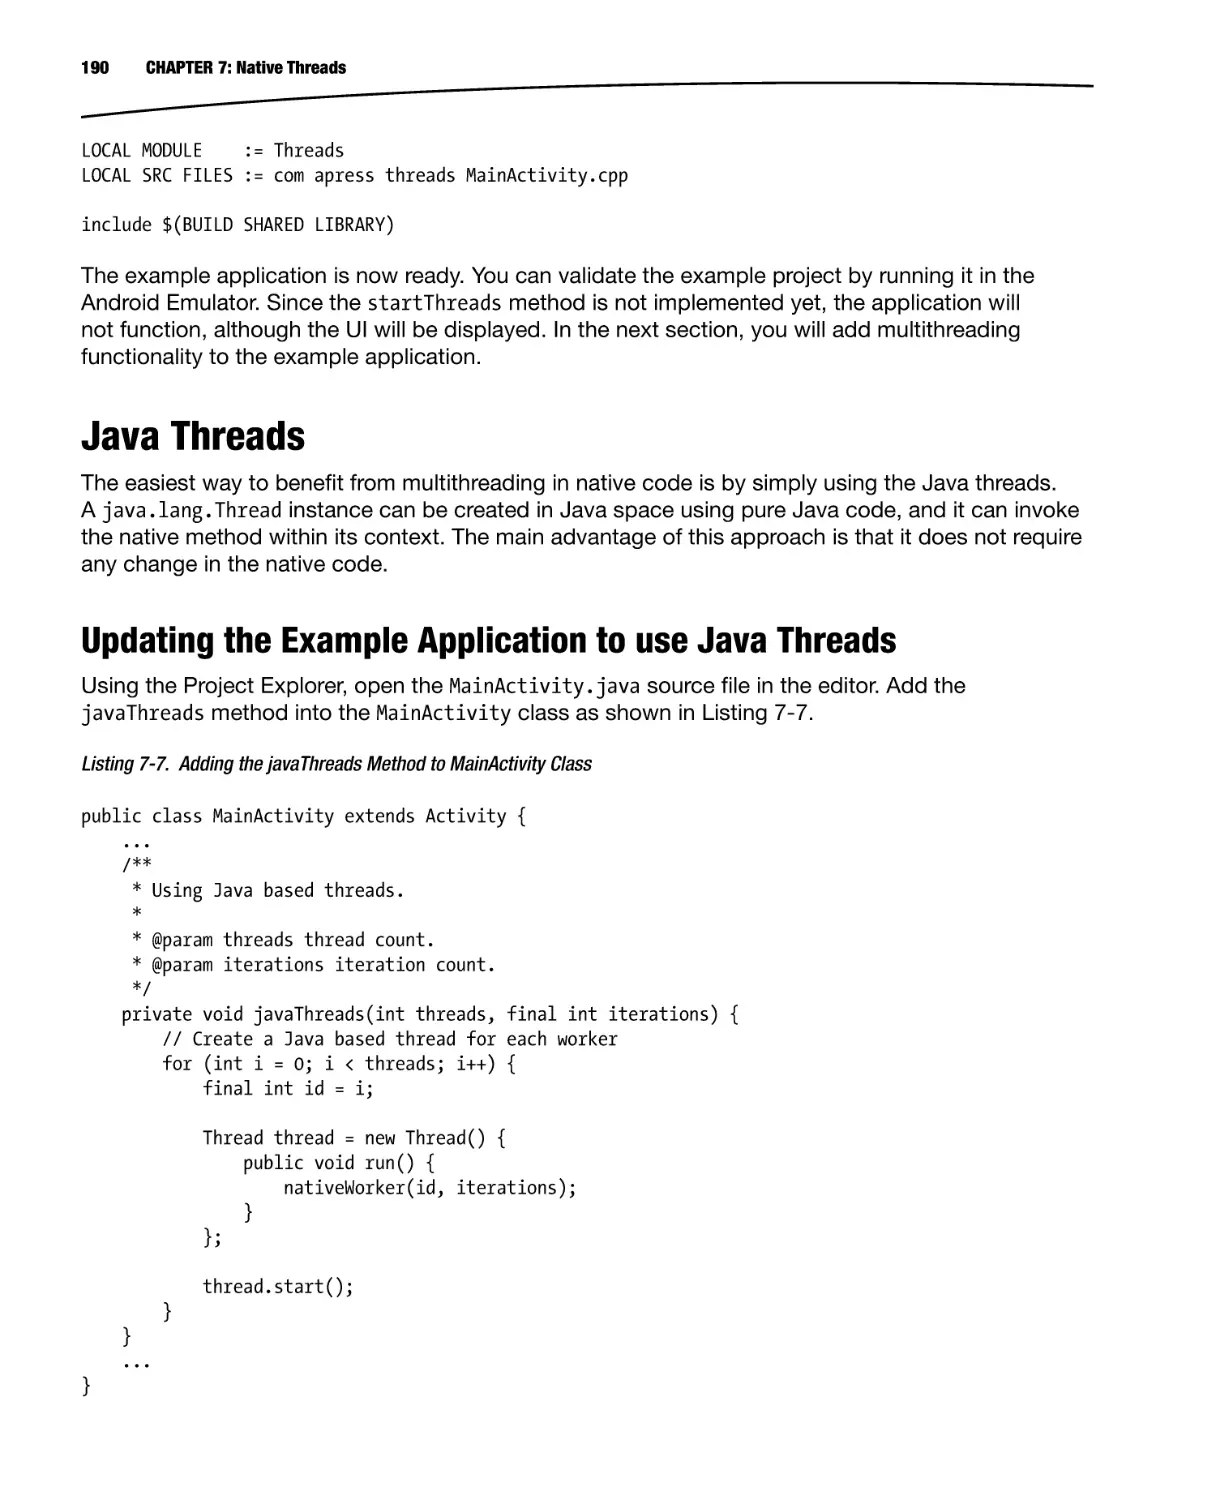 Java Threads
Updating the Example Application to use Java Threads